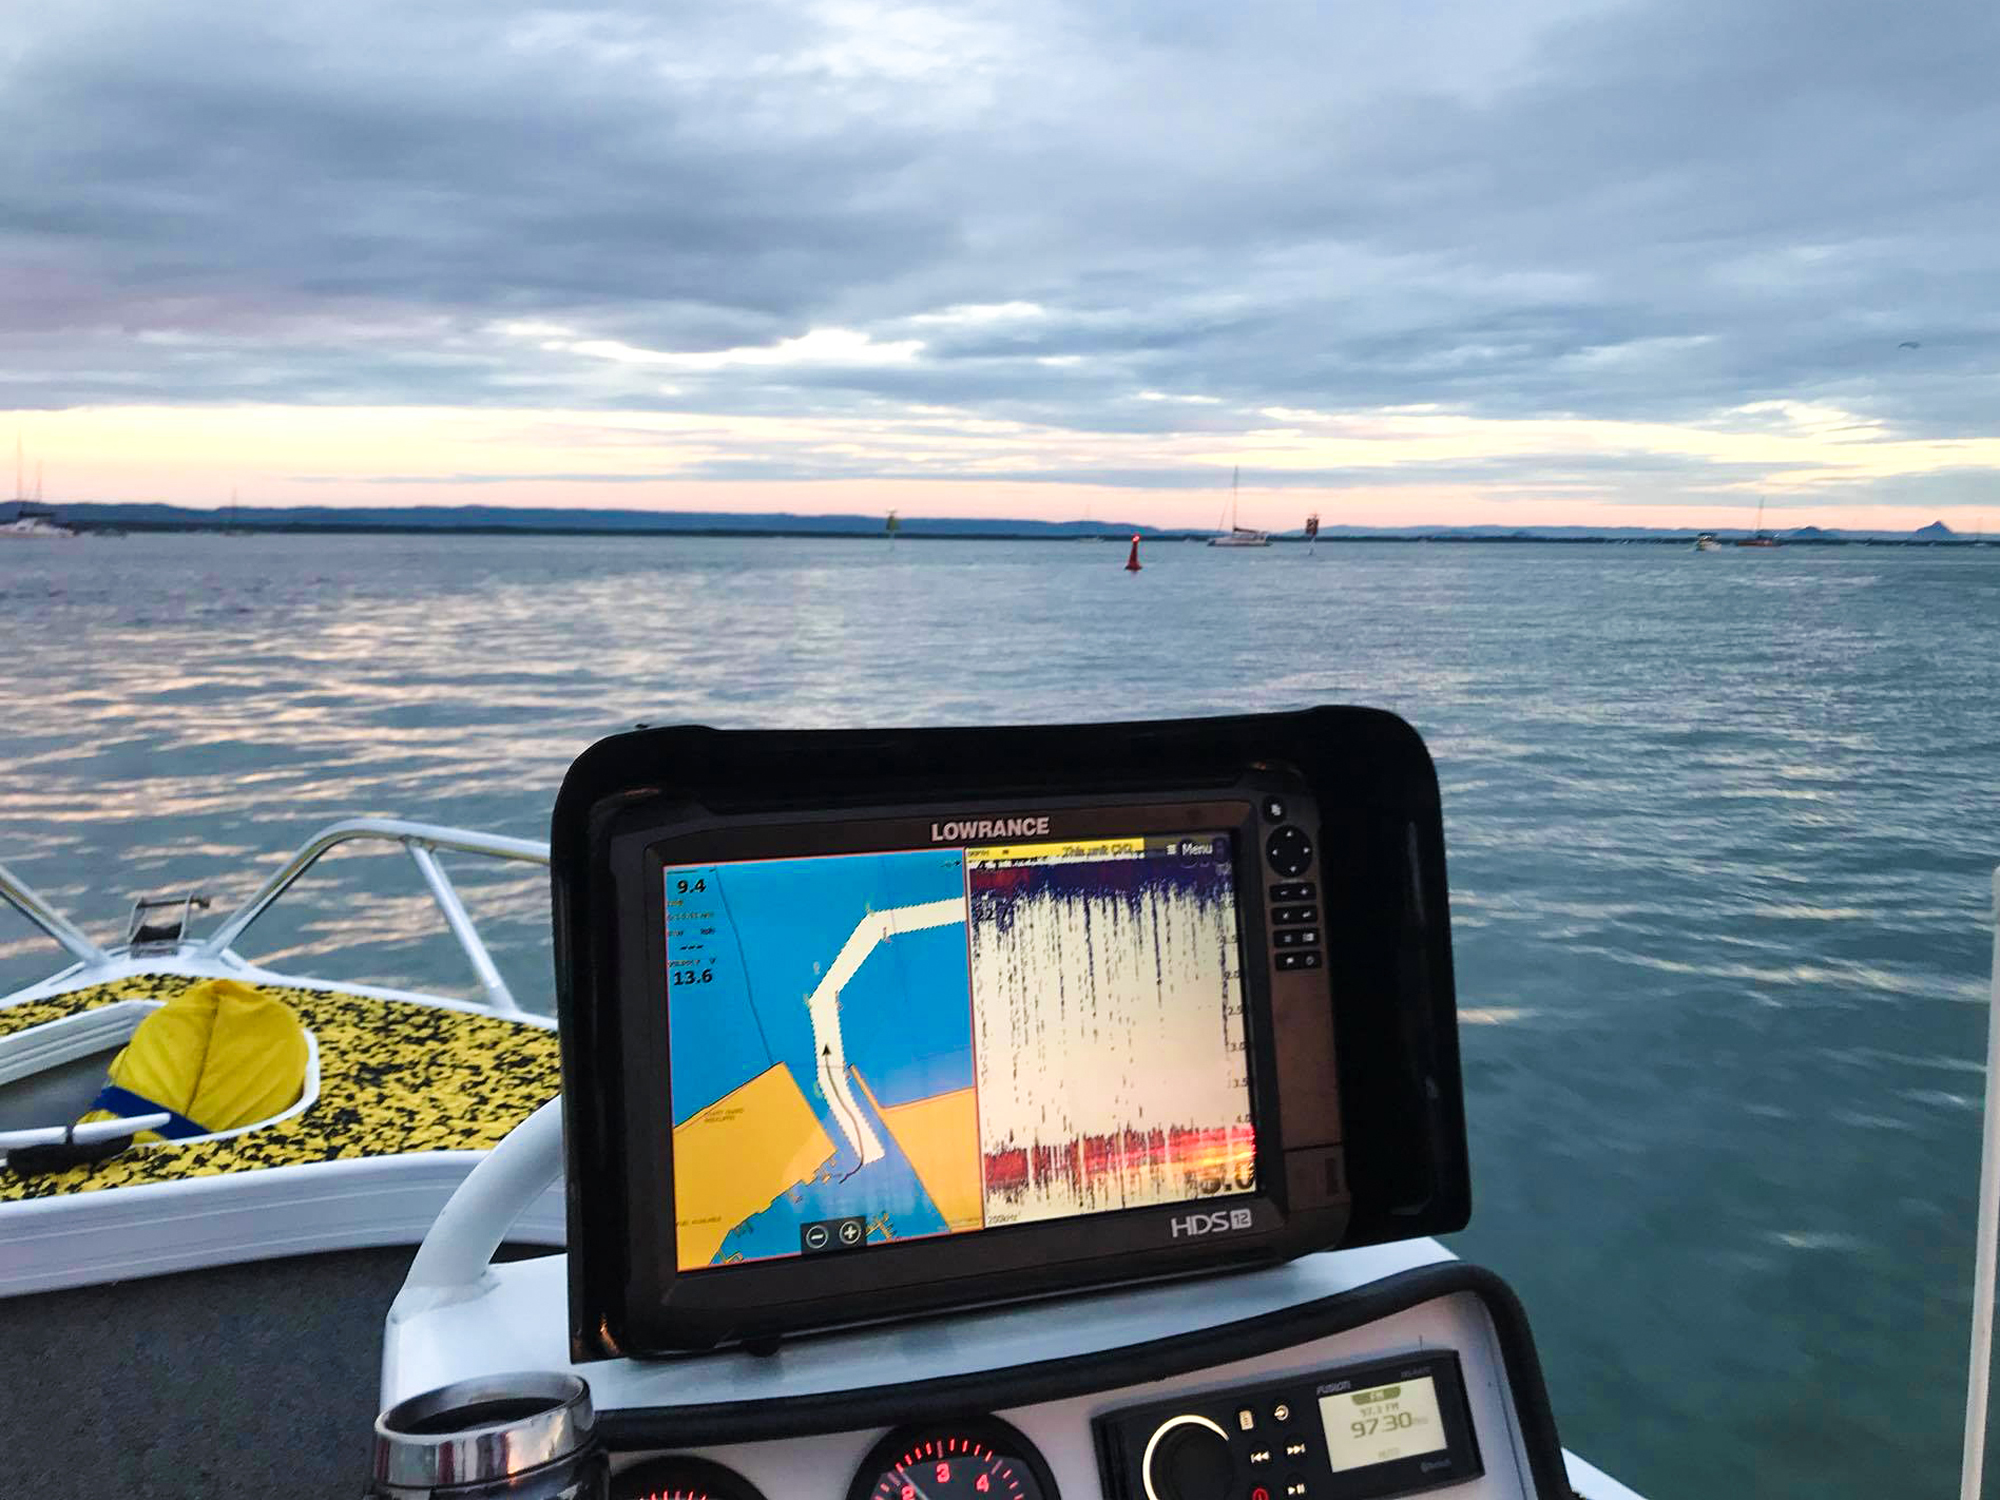  BerleyPro Visor Compatible with Lowrance, Lowrance HDS Pro, Lowrance  HDS Live, Lowrance HDS Carbon, Lowrance Elite FS, Lowrance Hook Reveal,  Lowrance Hook2, and More. - HDS Live/PRO 12 Visor : Electronics